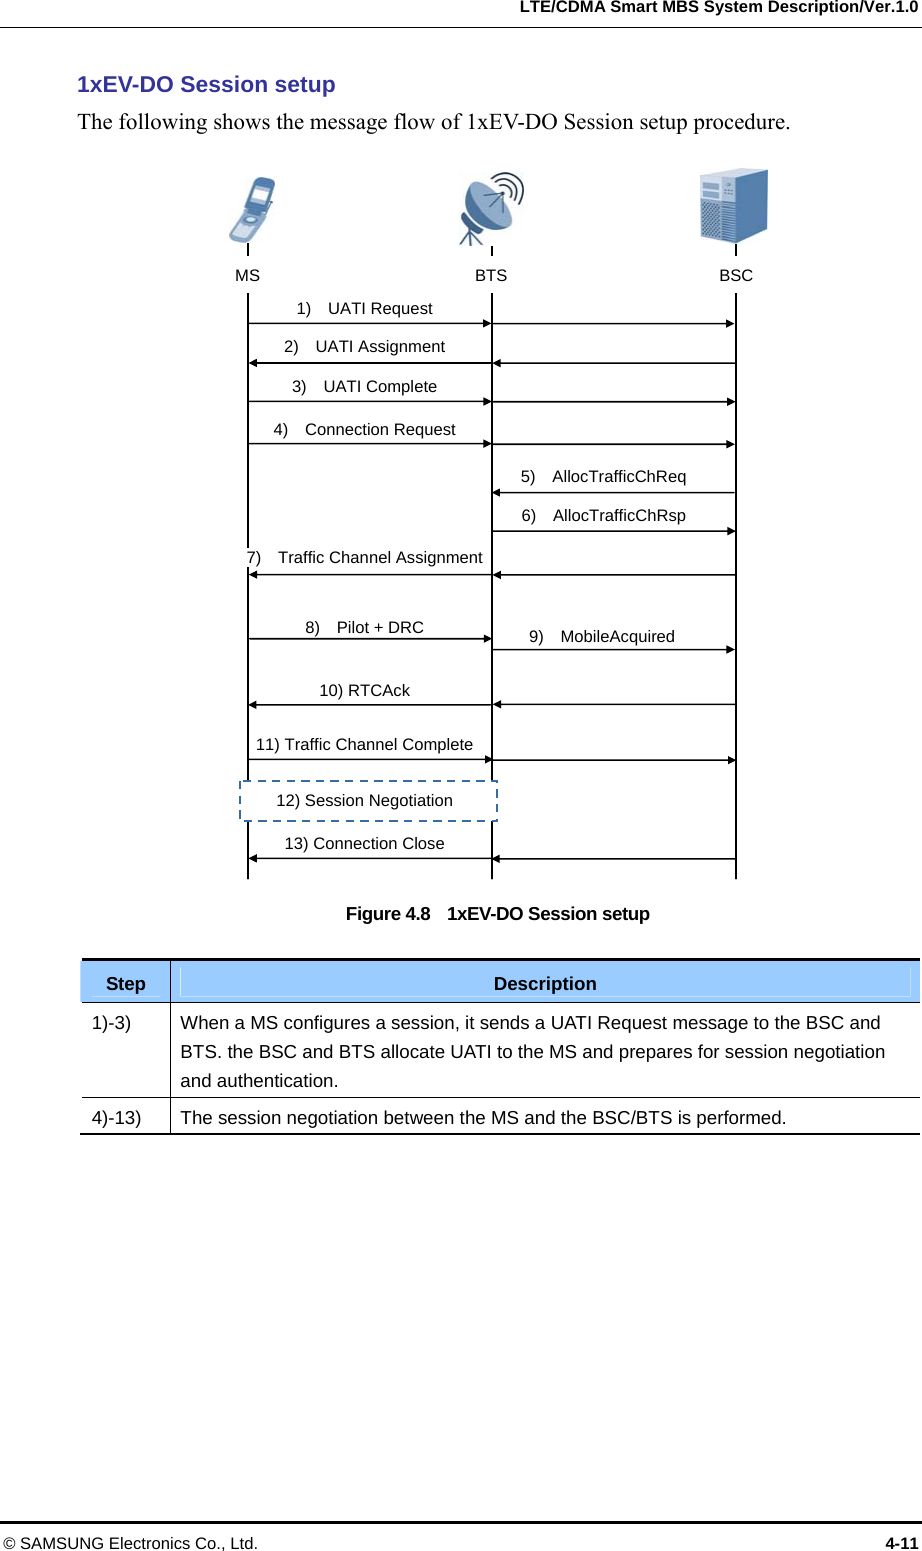   LTE/CDMA Smart MBS System Description/Ver.1.0 © SAMSUNG Electronics Co., Ltd.  4-11 1xEV-DO Session setup The following shows the message flow of 1xEV-DO Session setup procedure.  Figure 4.8    1xEV-DO Session setup  Step  Description 1)-3)  When a MS configures a session, it sends a UATI Request message to the BSC and BTS. the BSC and BTS allocate UATI to the MS and prepares for session negotiation and authentication. 4)-13)  The session negotiation between the MS and the BSC/BTS is performed.    MS  BTS BSC 1)  UATI Request 2)  UATI Assignment 3)  UATI Complete 4)  Connection Request 7)  Traffic Channel Assignment 5)  AllocTrafficChReq 6)  AllocTrafficChRsp 8)  Pilot + DRC  9)  MobileAcquired  10) RTCAck 11) Traffic Channel Complete 13) Connection Close 12) Session Negotiation 